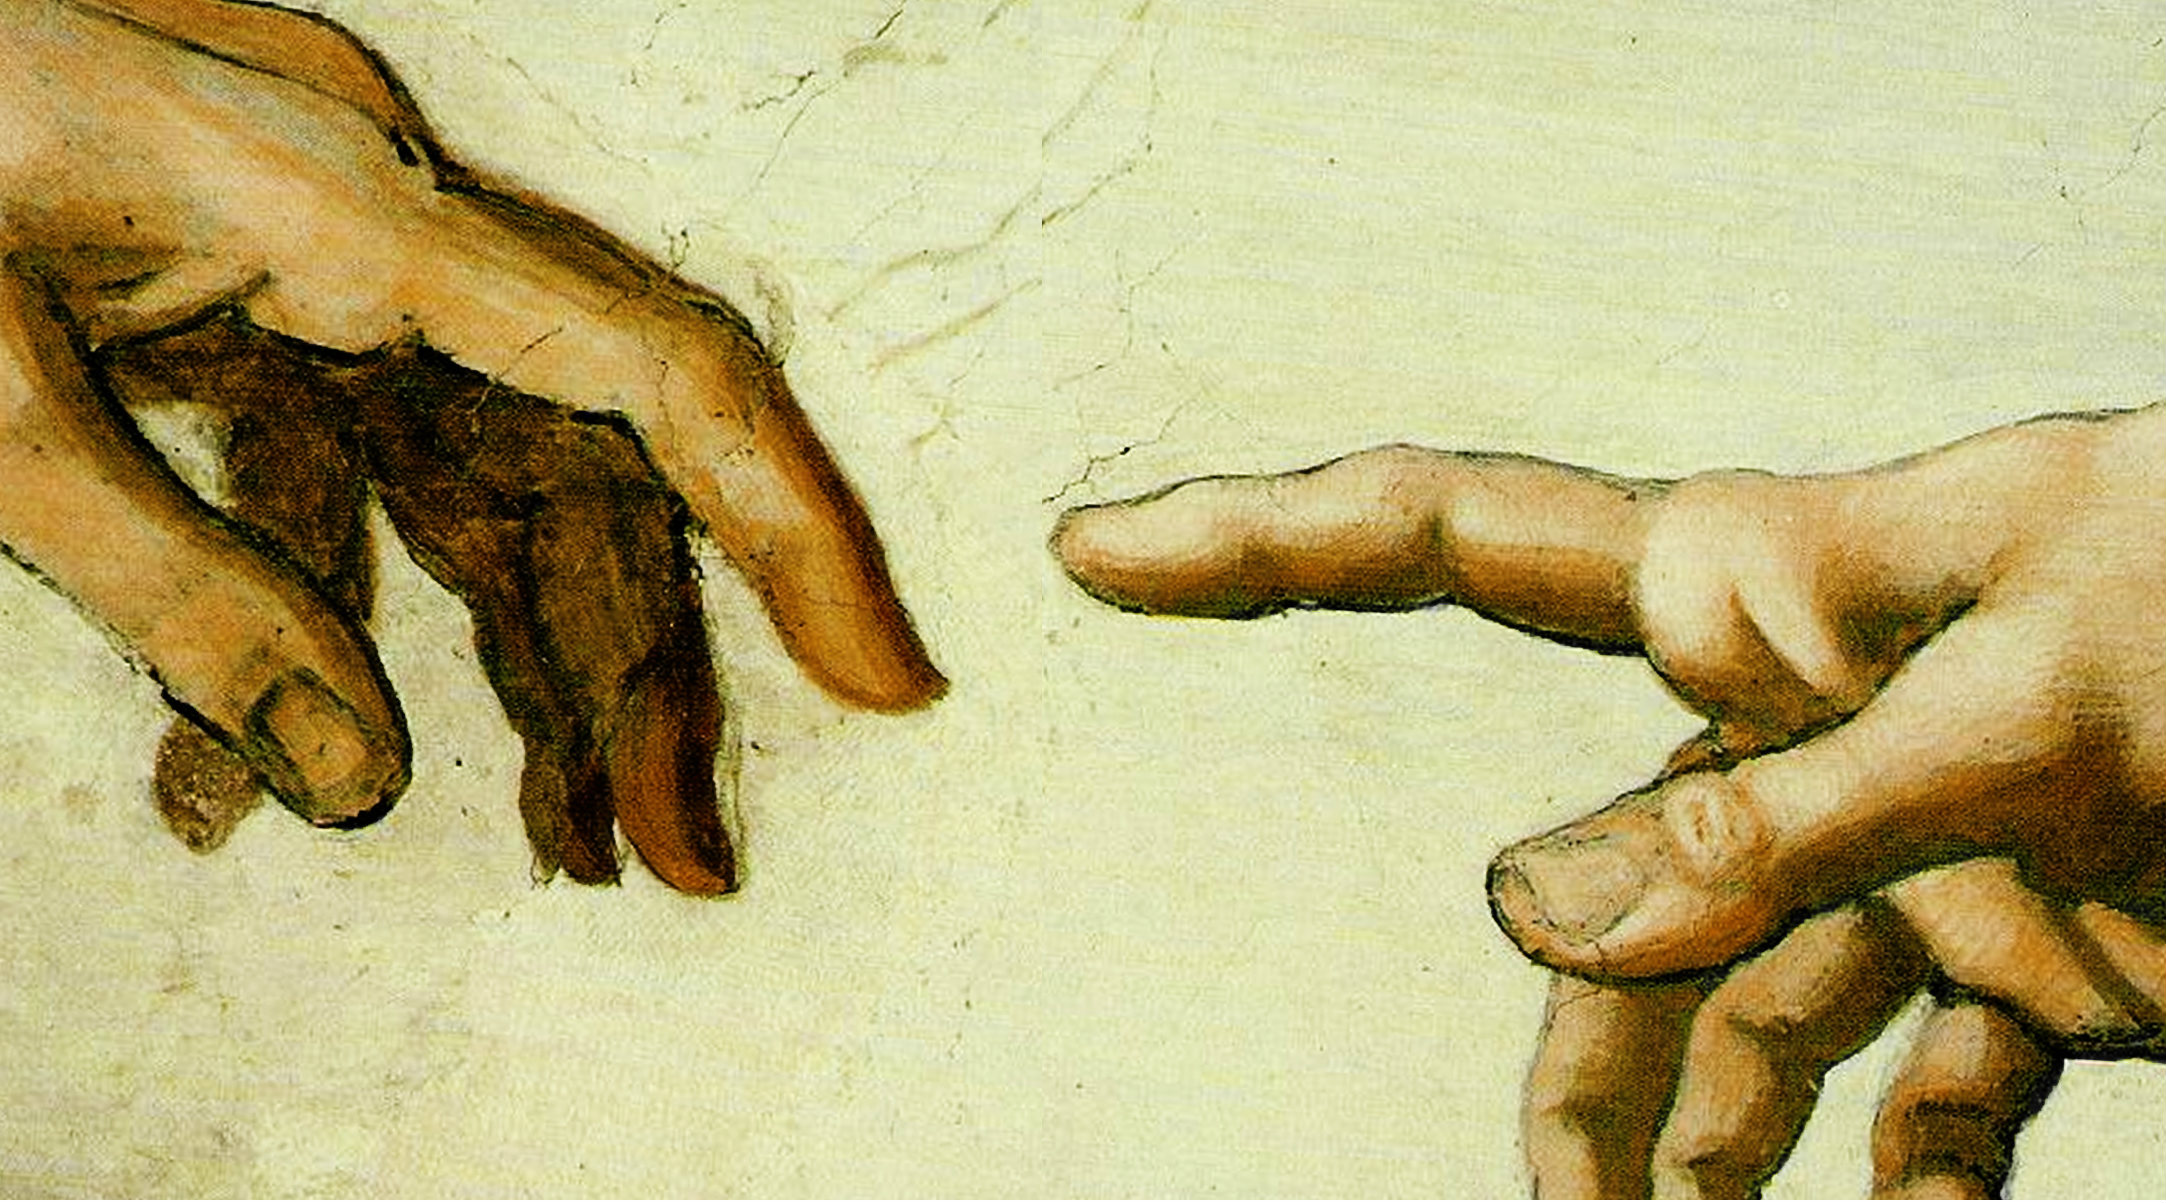 St. Augustine Gods Hand Reaching for Man